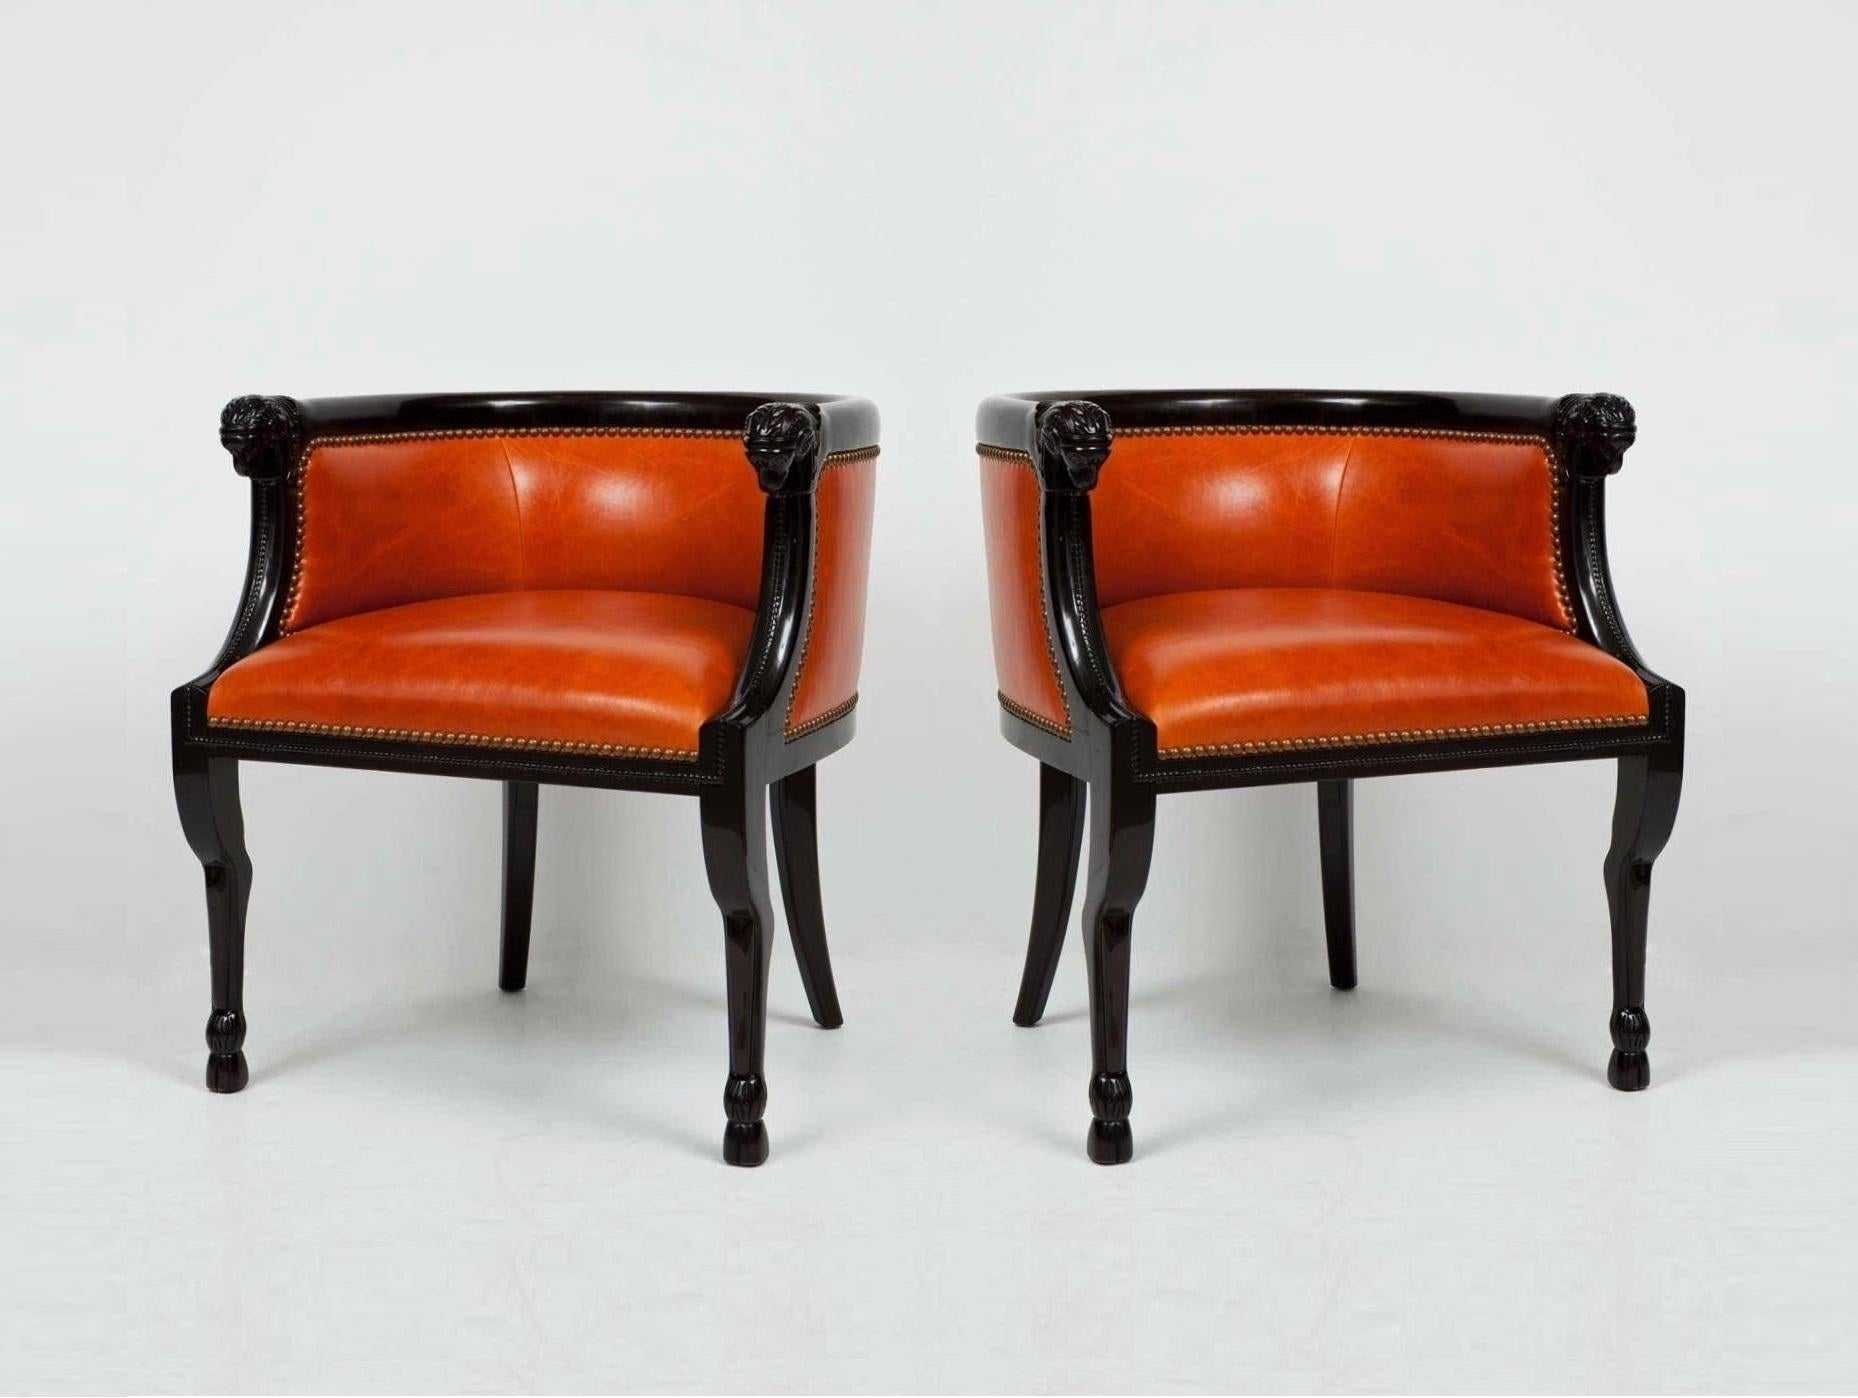 Tailored stately pair of professionally lacquered bergères. These armchairs feature a barrel back including a rounded edge over an upholstered inset panel with finely carved ram's head hand holds. The gentle curve from the back along the arm is very